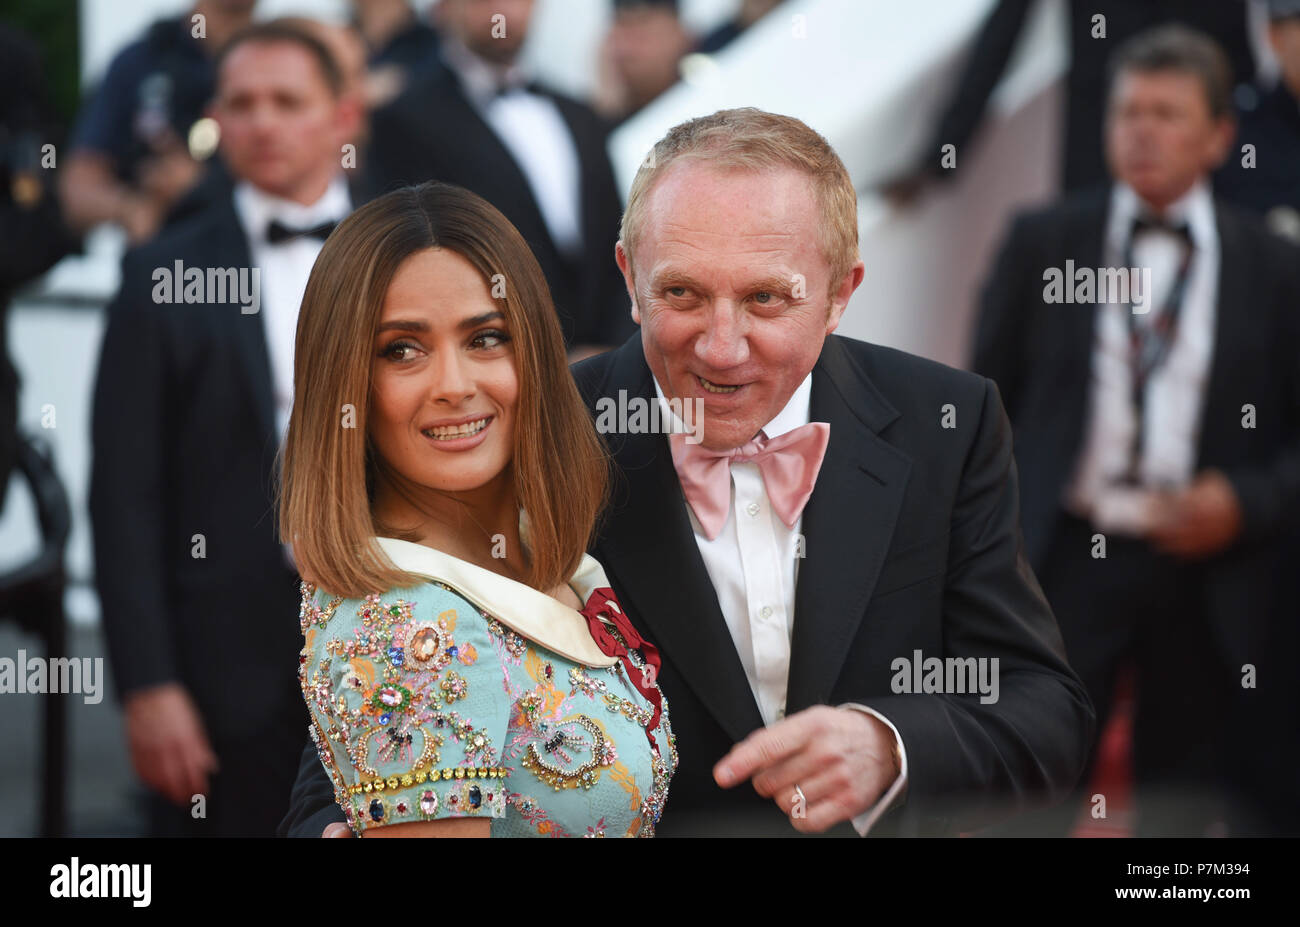 May 23, 2017 - Cannes, France: Salma Hayek and Franois-Henri Pinault attend the 70th anniversary ceremony during the 70th Cannes film festival.  Salma Hayek et Francois-Henri Pinault lors du 70eme Festival de Cannes. *** FRANCE OUT / NO SALES TO FRENCH MEDIA *** Stock Photo